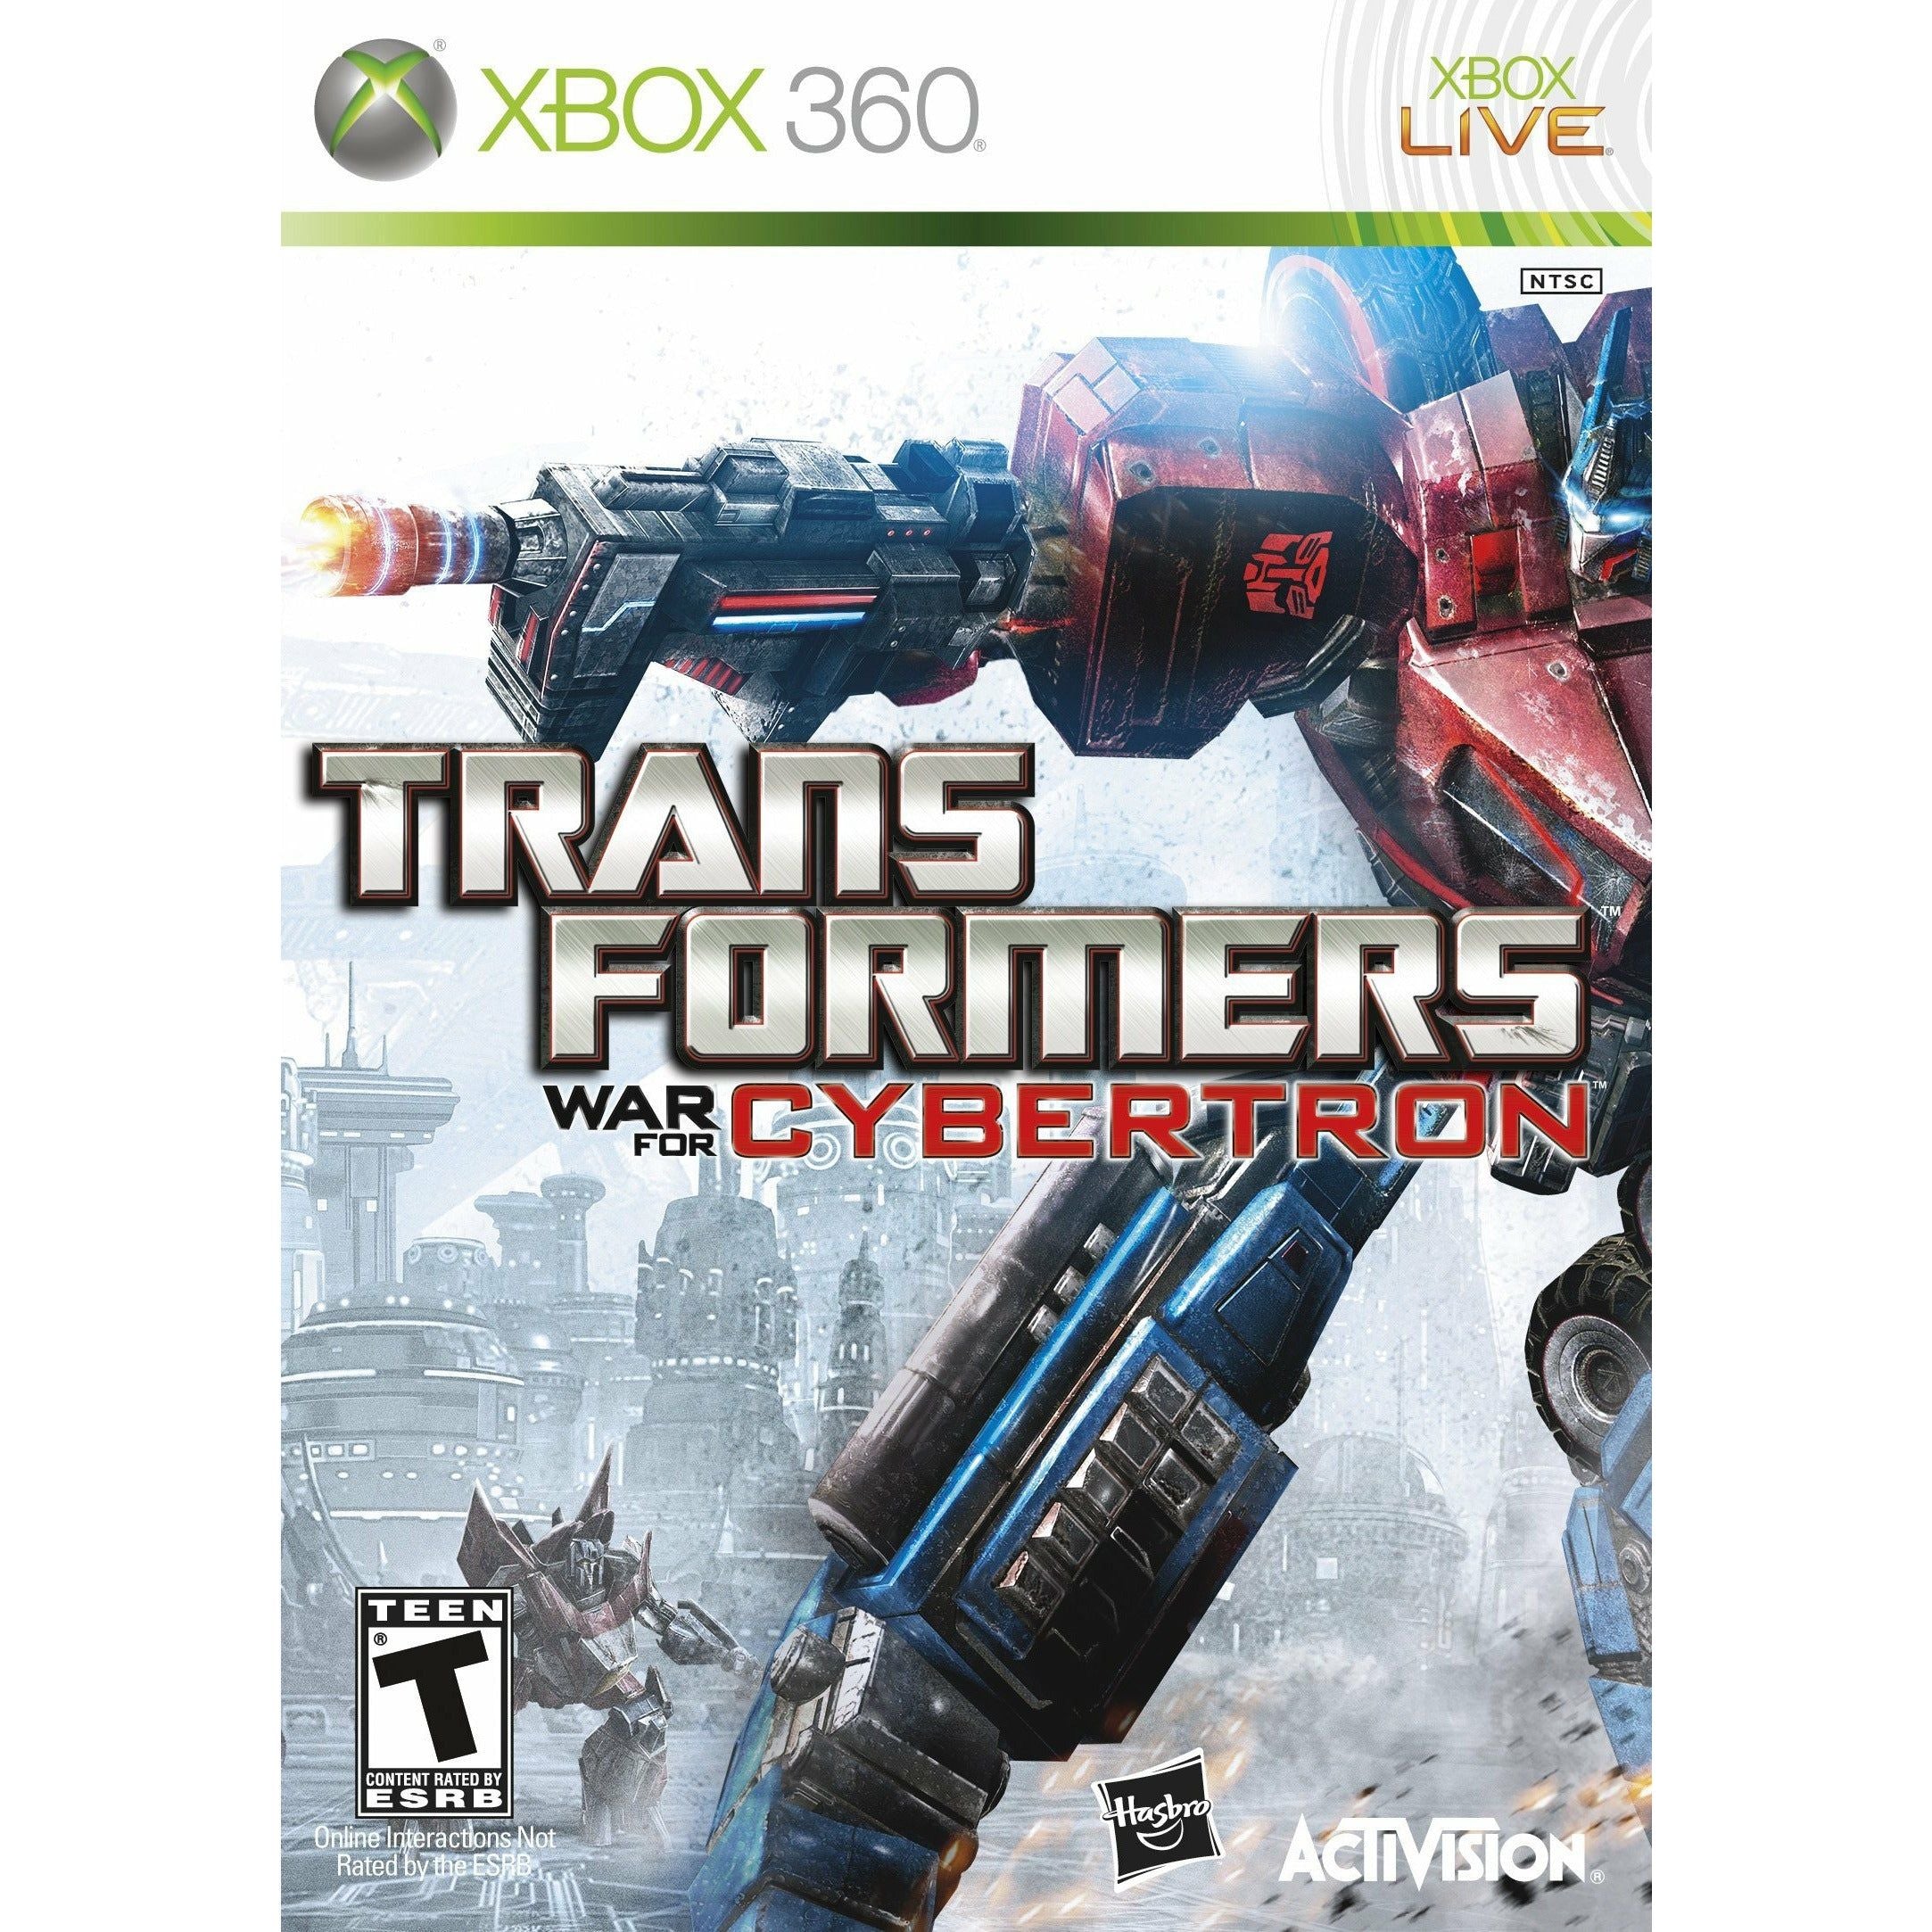 XBOX 360 - Transformers War For Cybertron